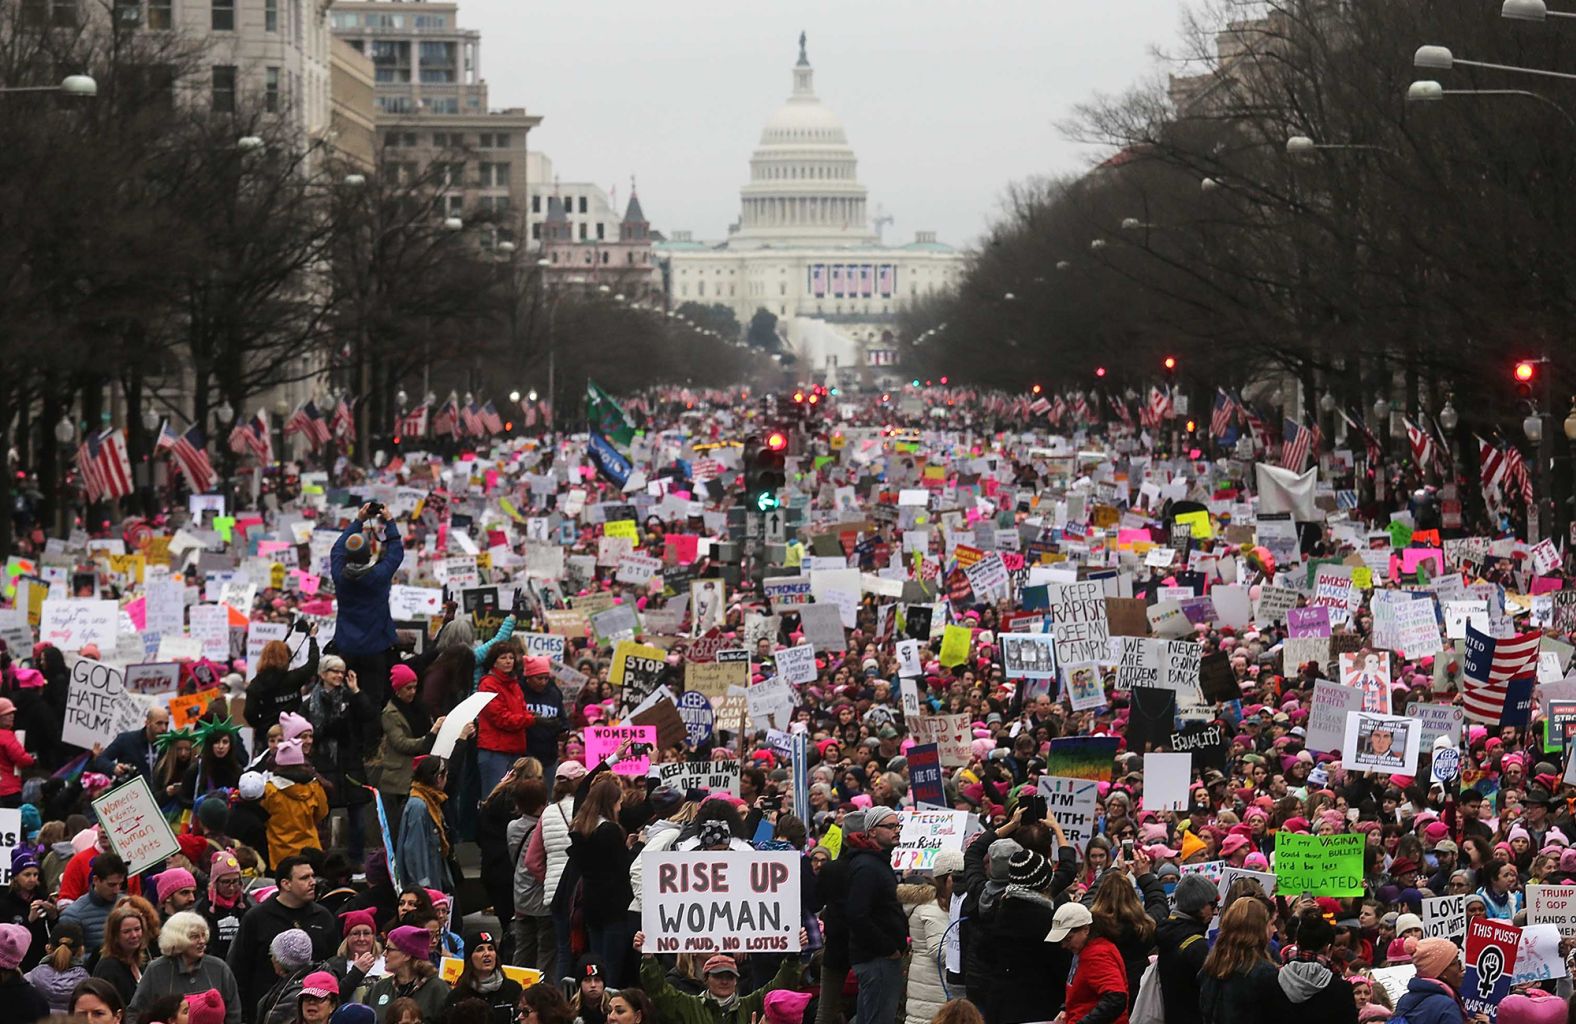 Thousands of people walk down Pennsylvania Avenue in Washington, DC. during a march for women's rights in January 2017. More than 1 million people participated in the Women's March nationwide, making it the largest single-day protest in American history.